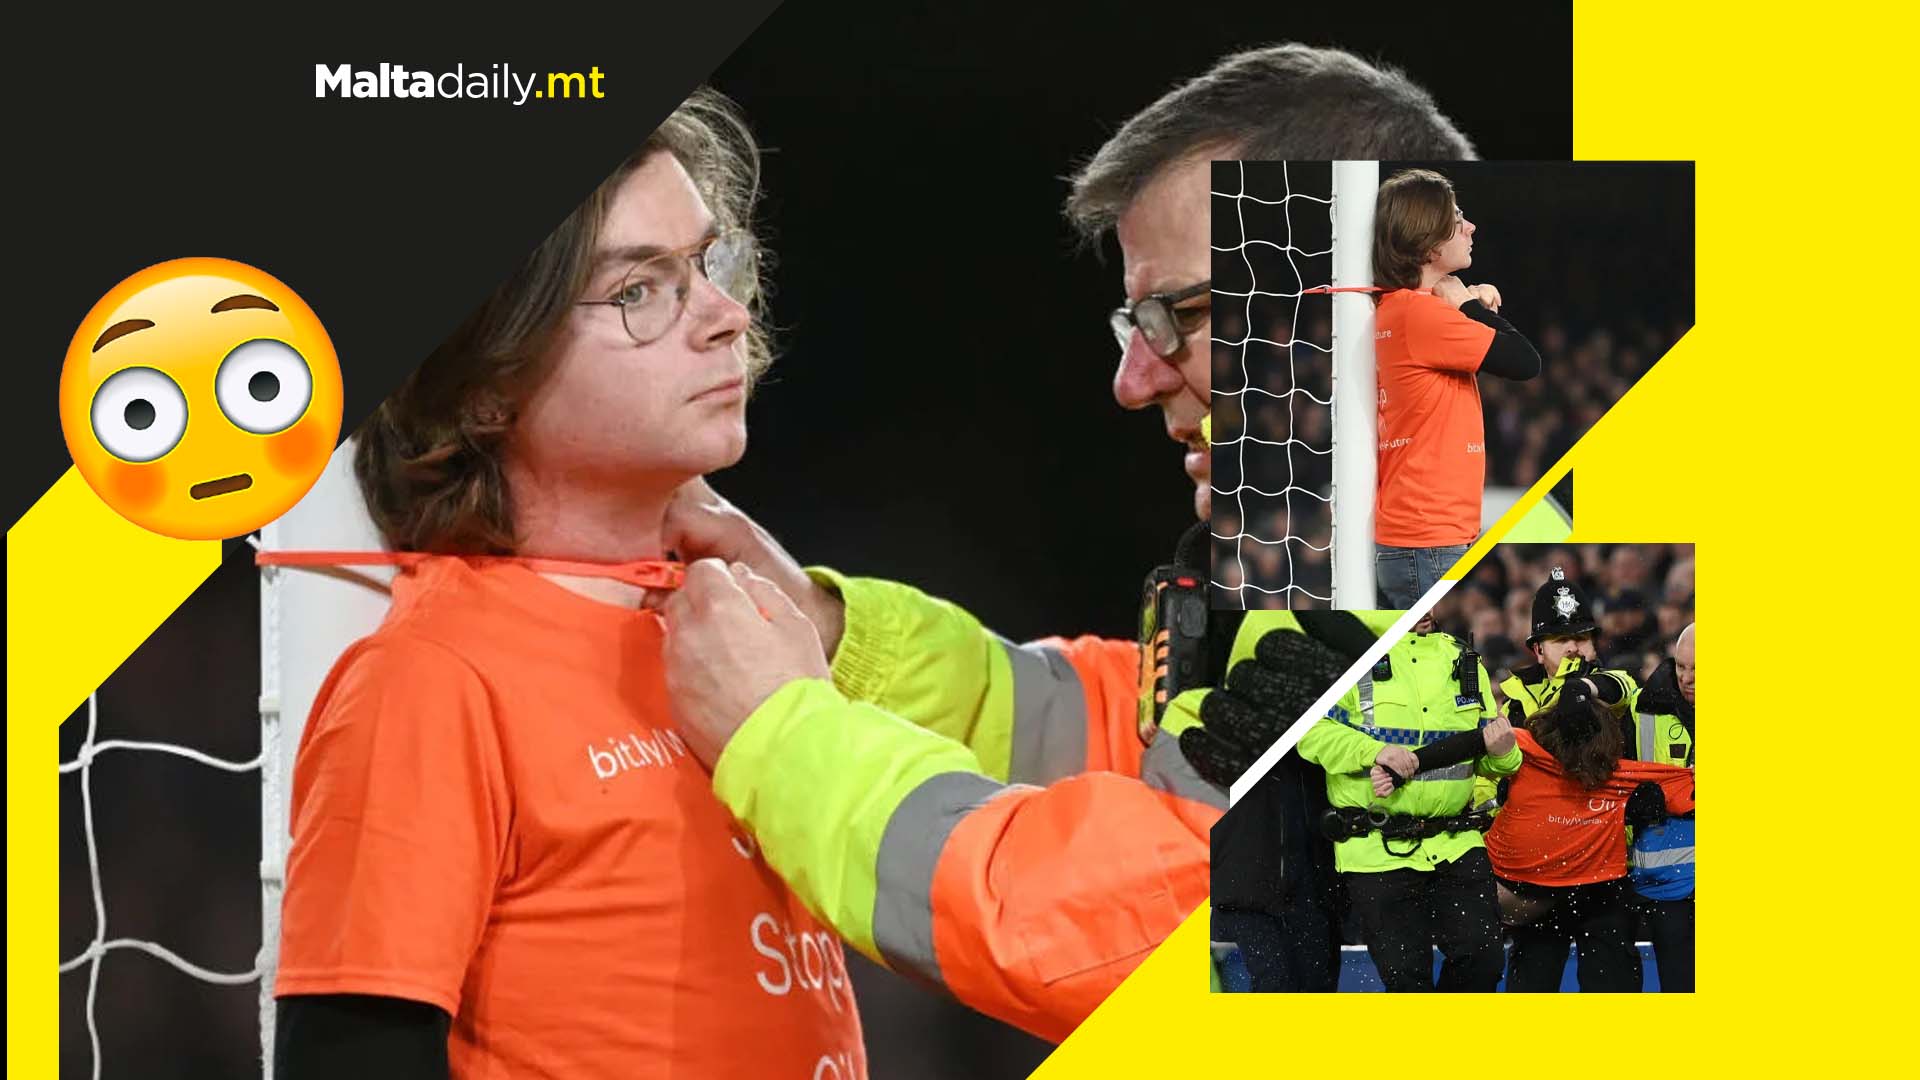 Protestor ties himself to goal post during Premiere League match